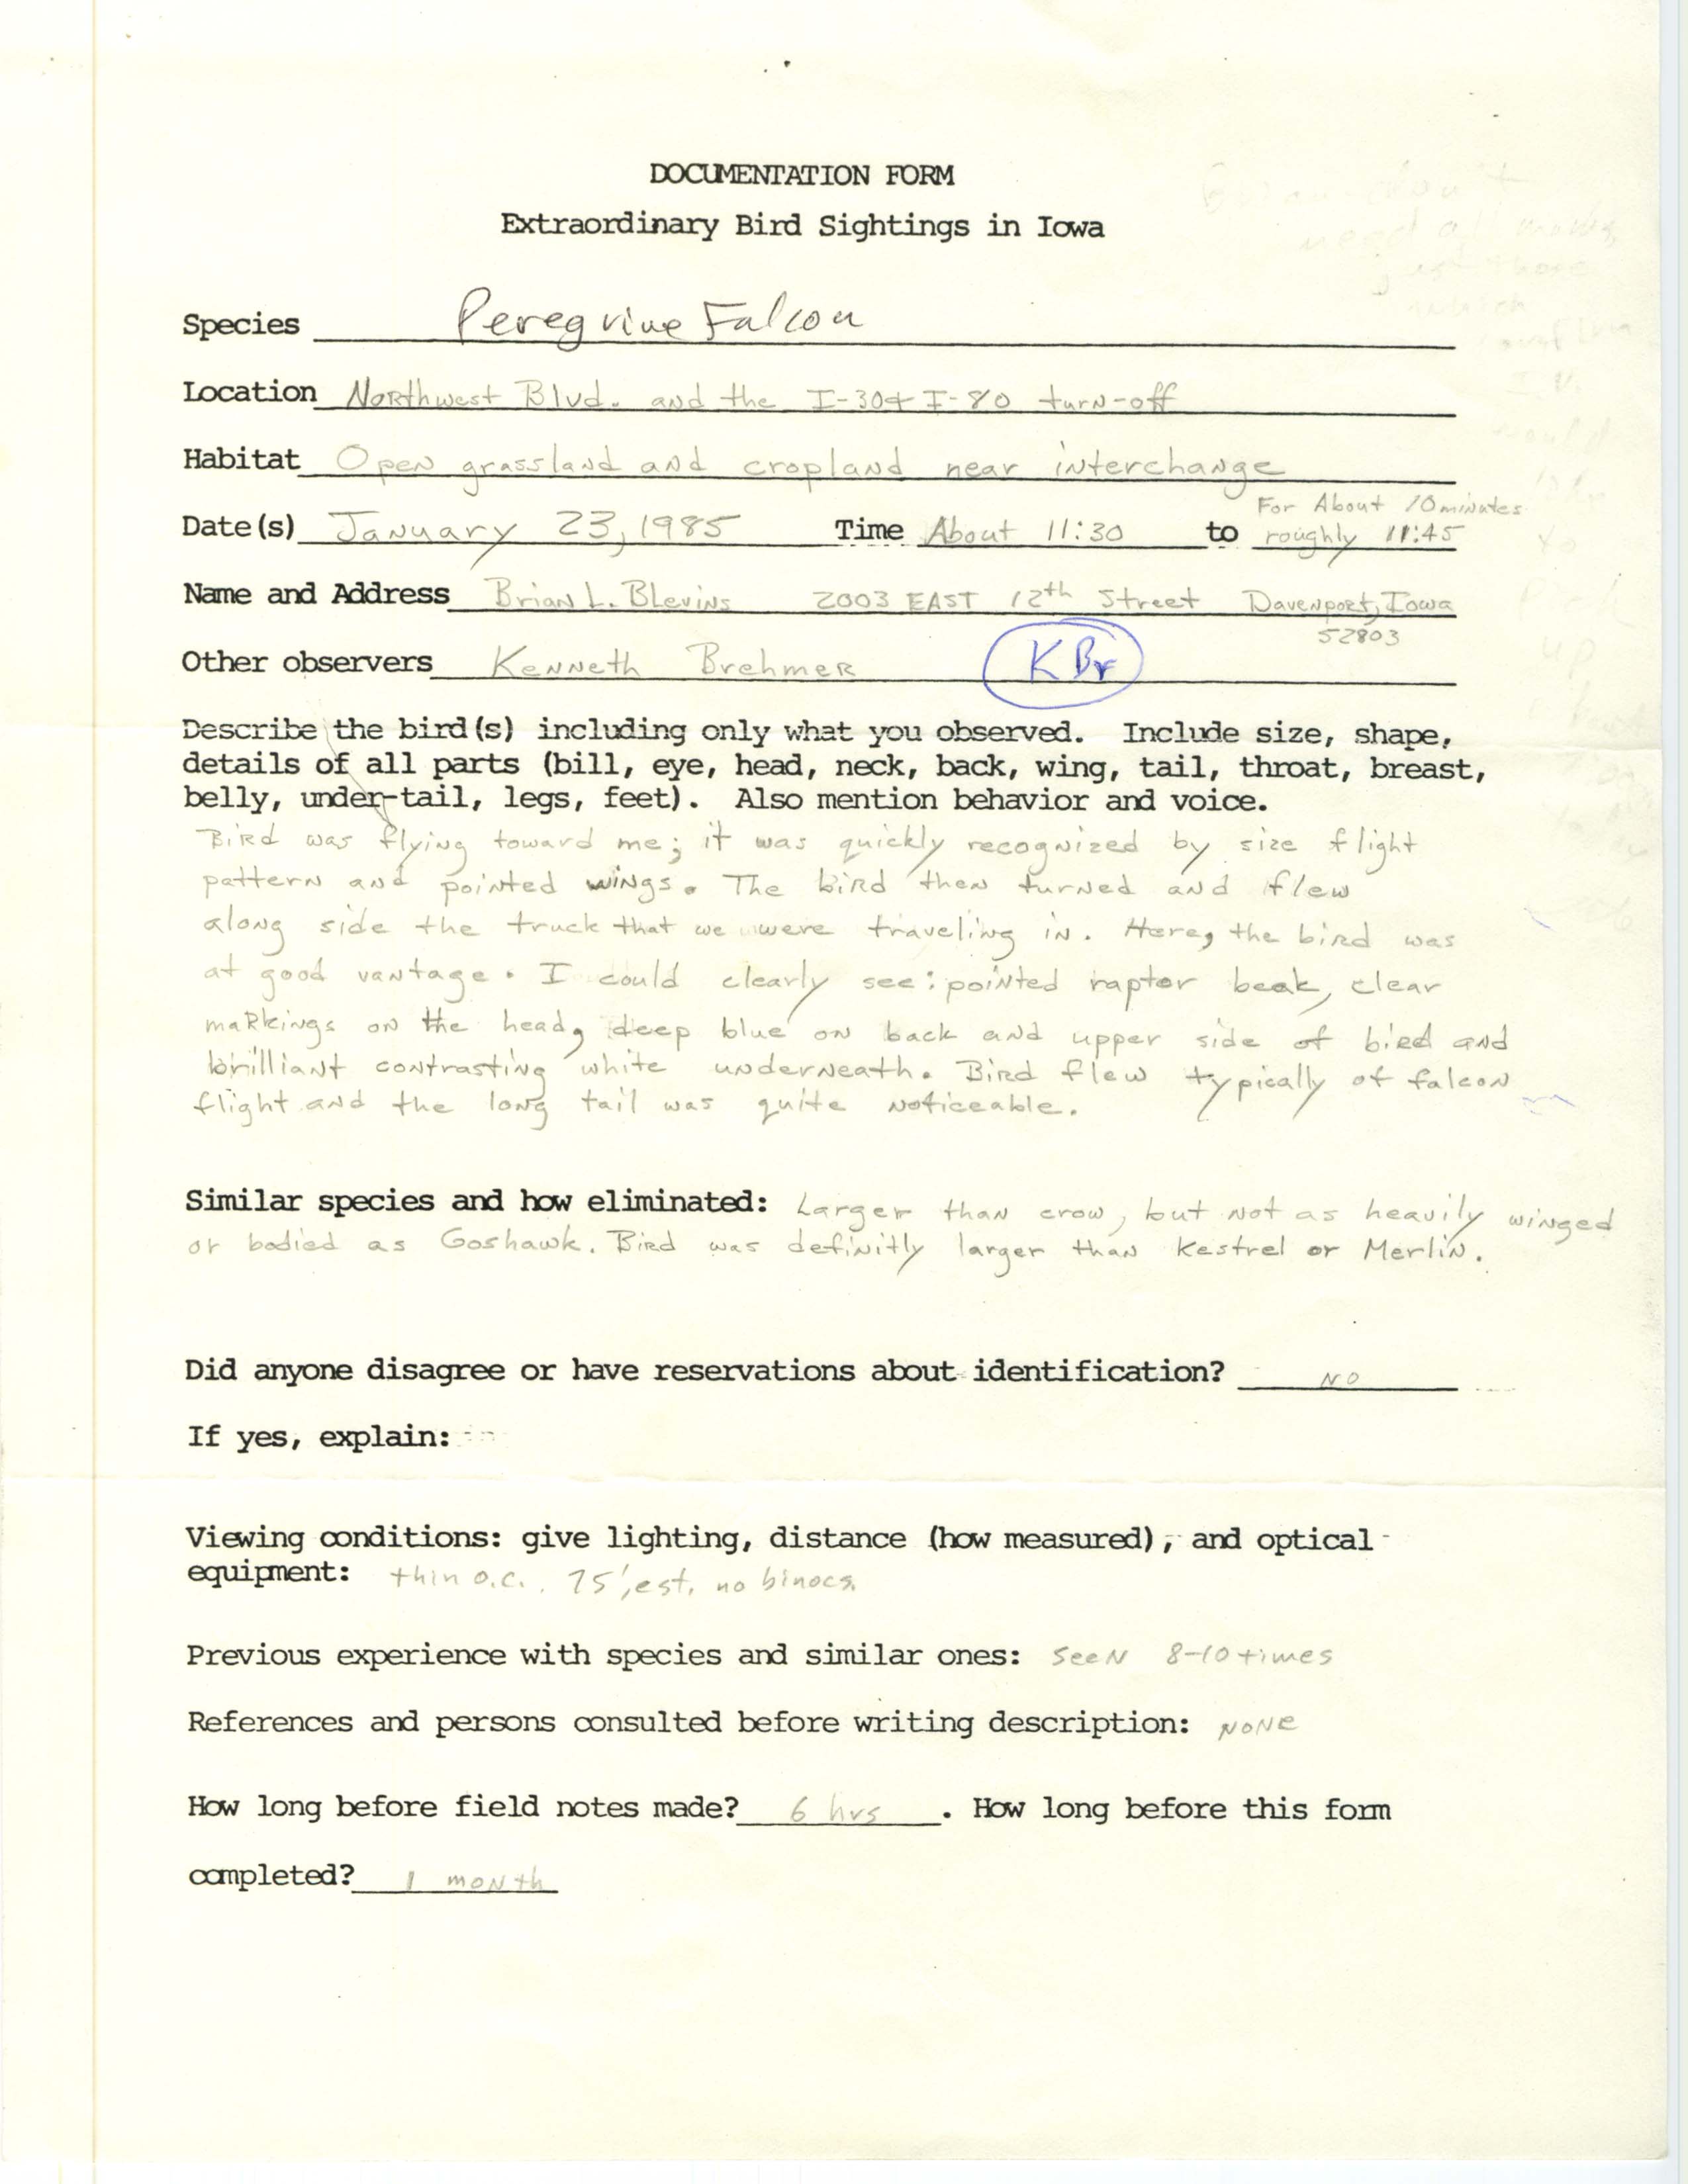 Rare bird documentation form for Peregrine Falcon at the interchange of IA-130 and Interstate 80 in Davenport, 1985